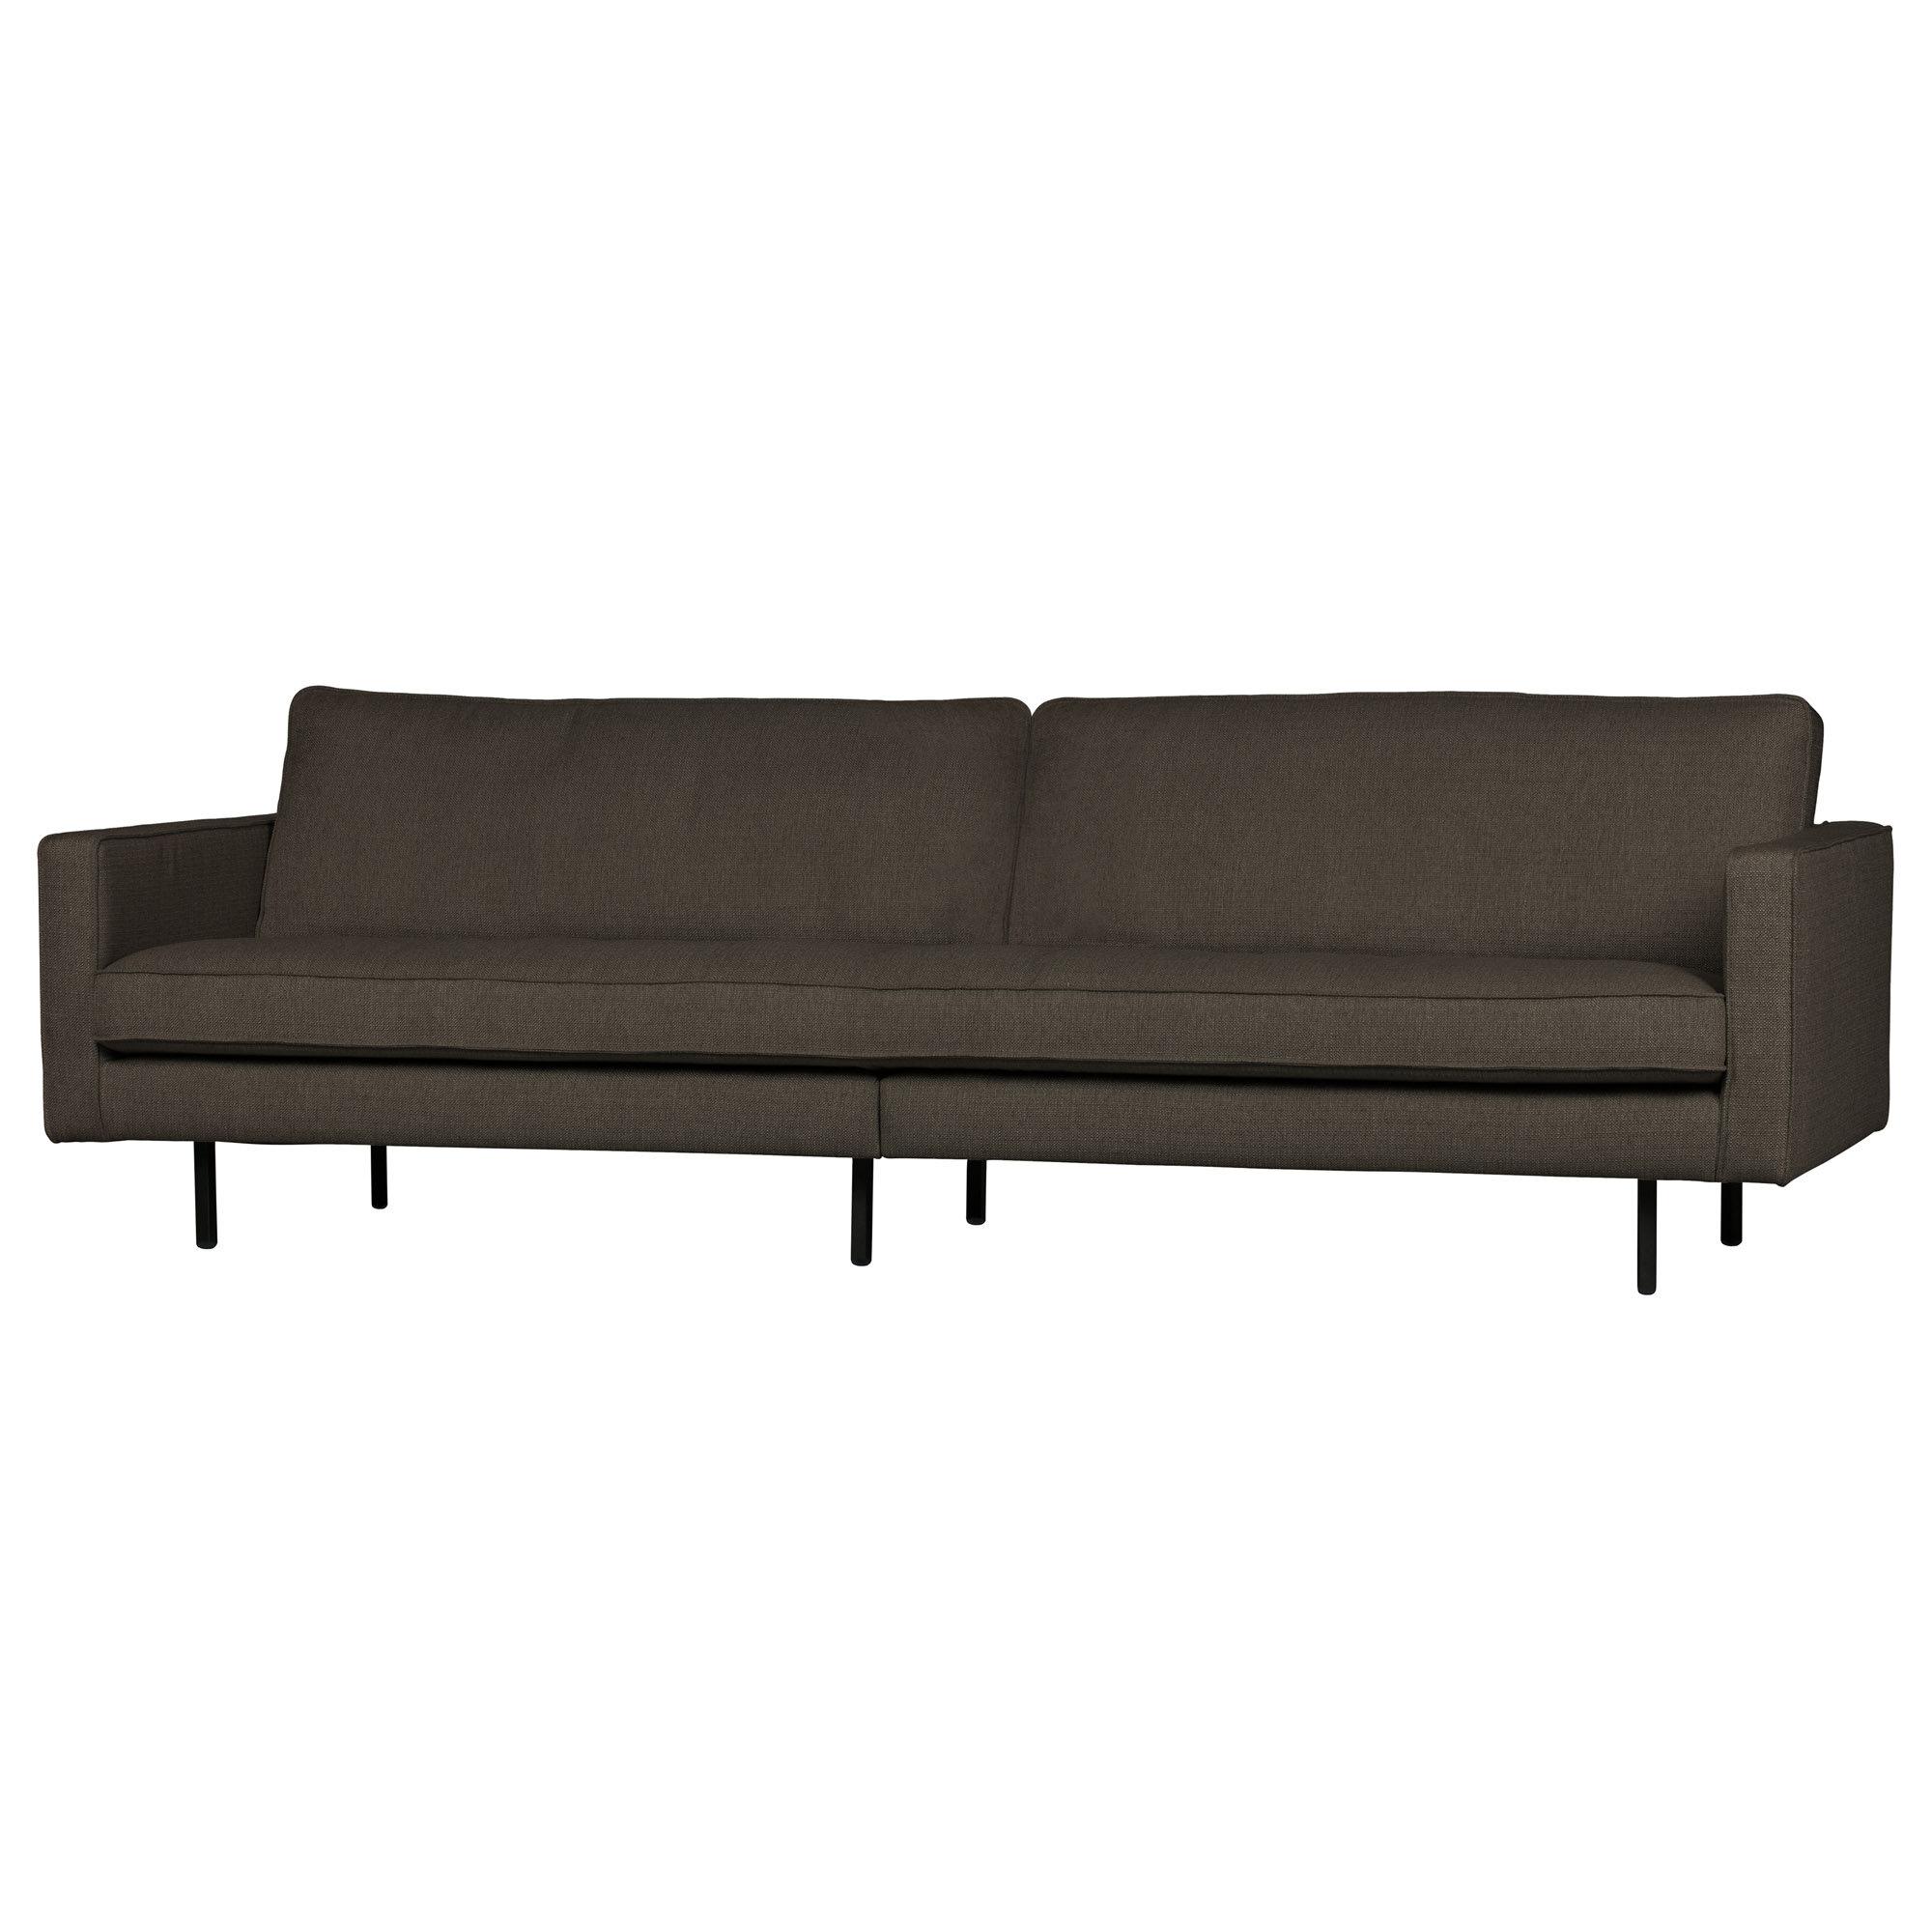  Rodeo Stretched 3-pers Sofa - Warm Grey/Brown fra BePureHome i Stof (Varenr: 801543-W)